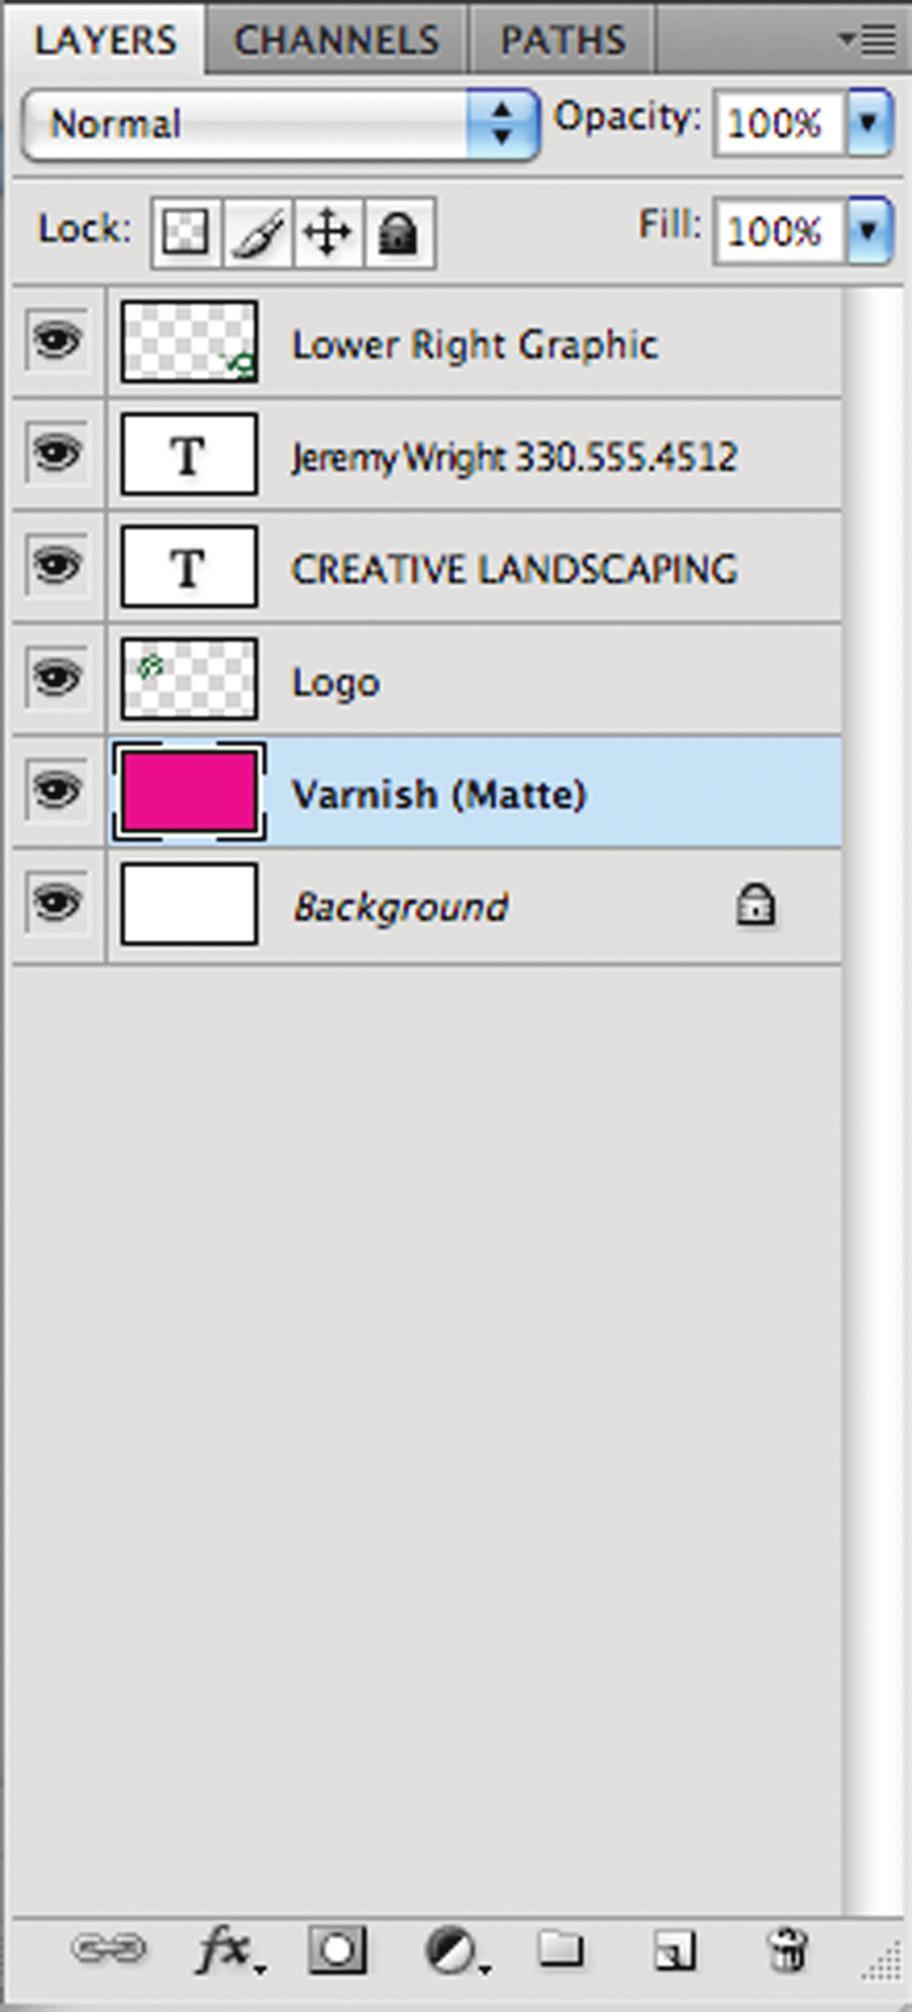 ADDING VARNISH, CONT. In order for your varnish to print correctly, you MUST keep your file separated into layers.